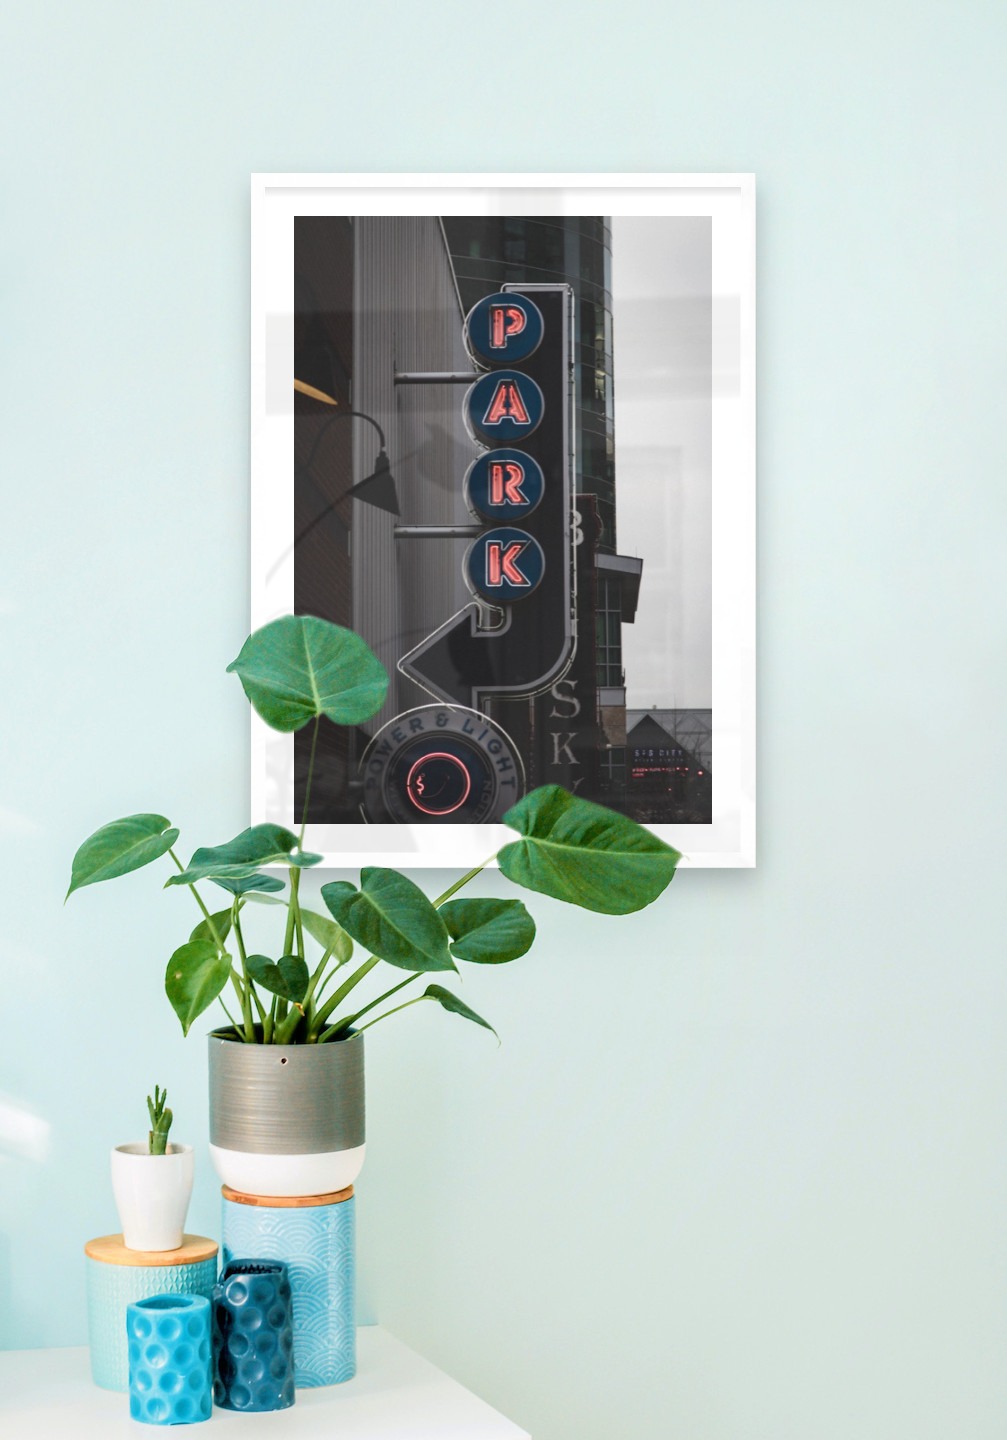 Gallery wall with picture frame in white in size 50x70 with print "Sign "Park""